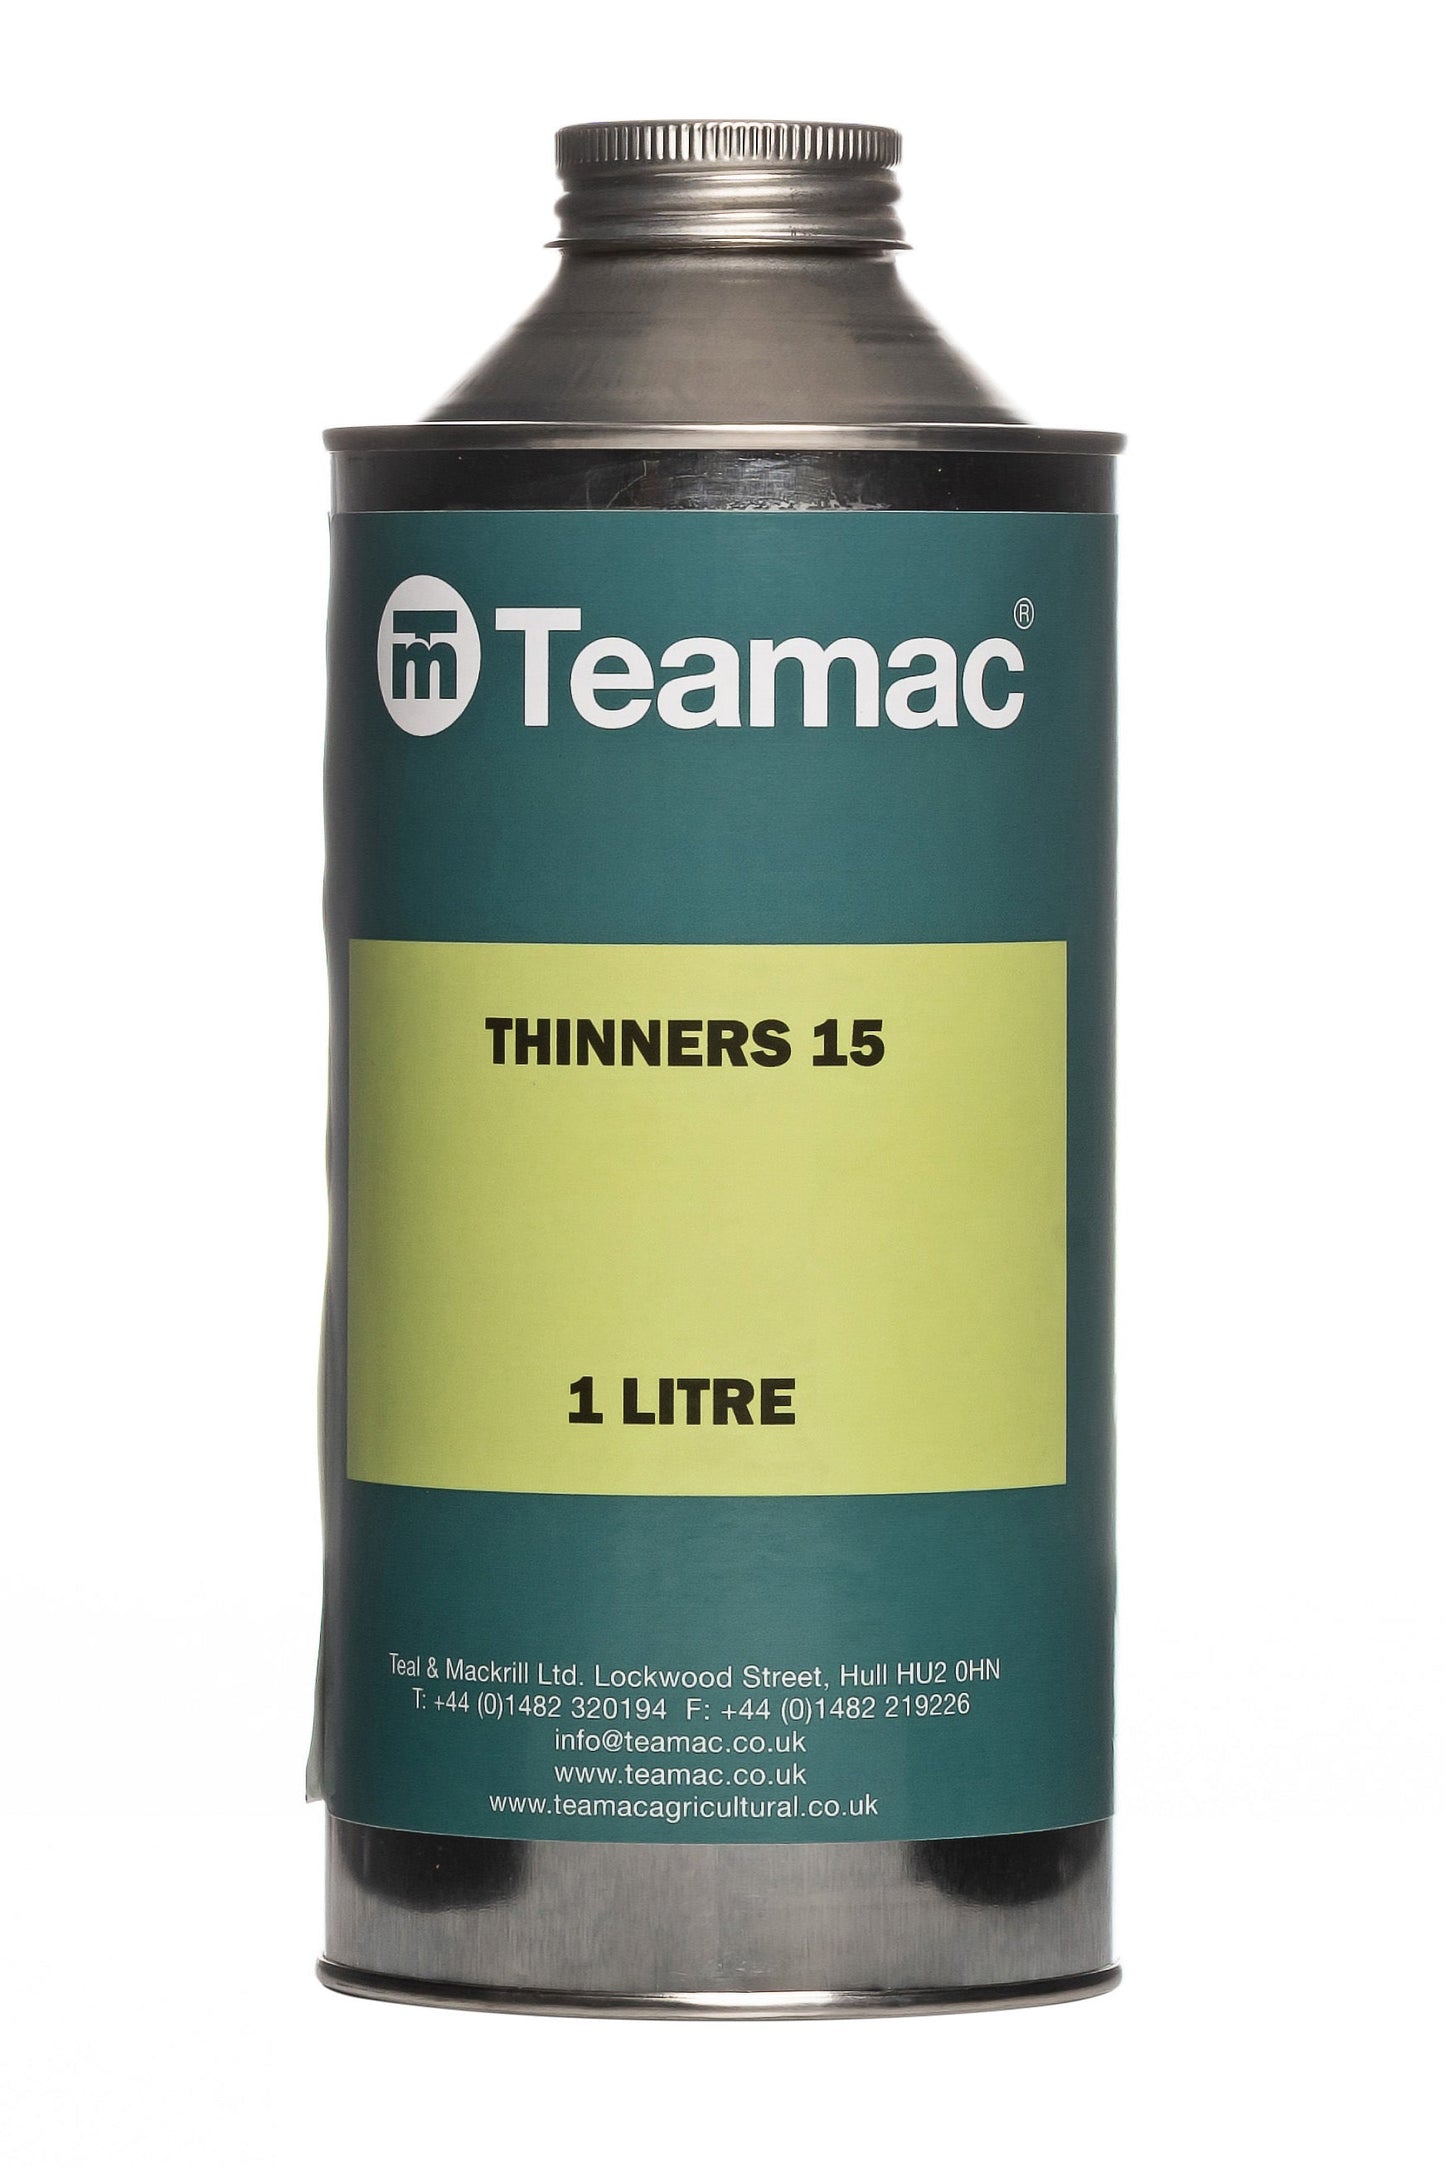 Teamac Agricultural Thinners 15 2.5L